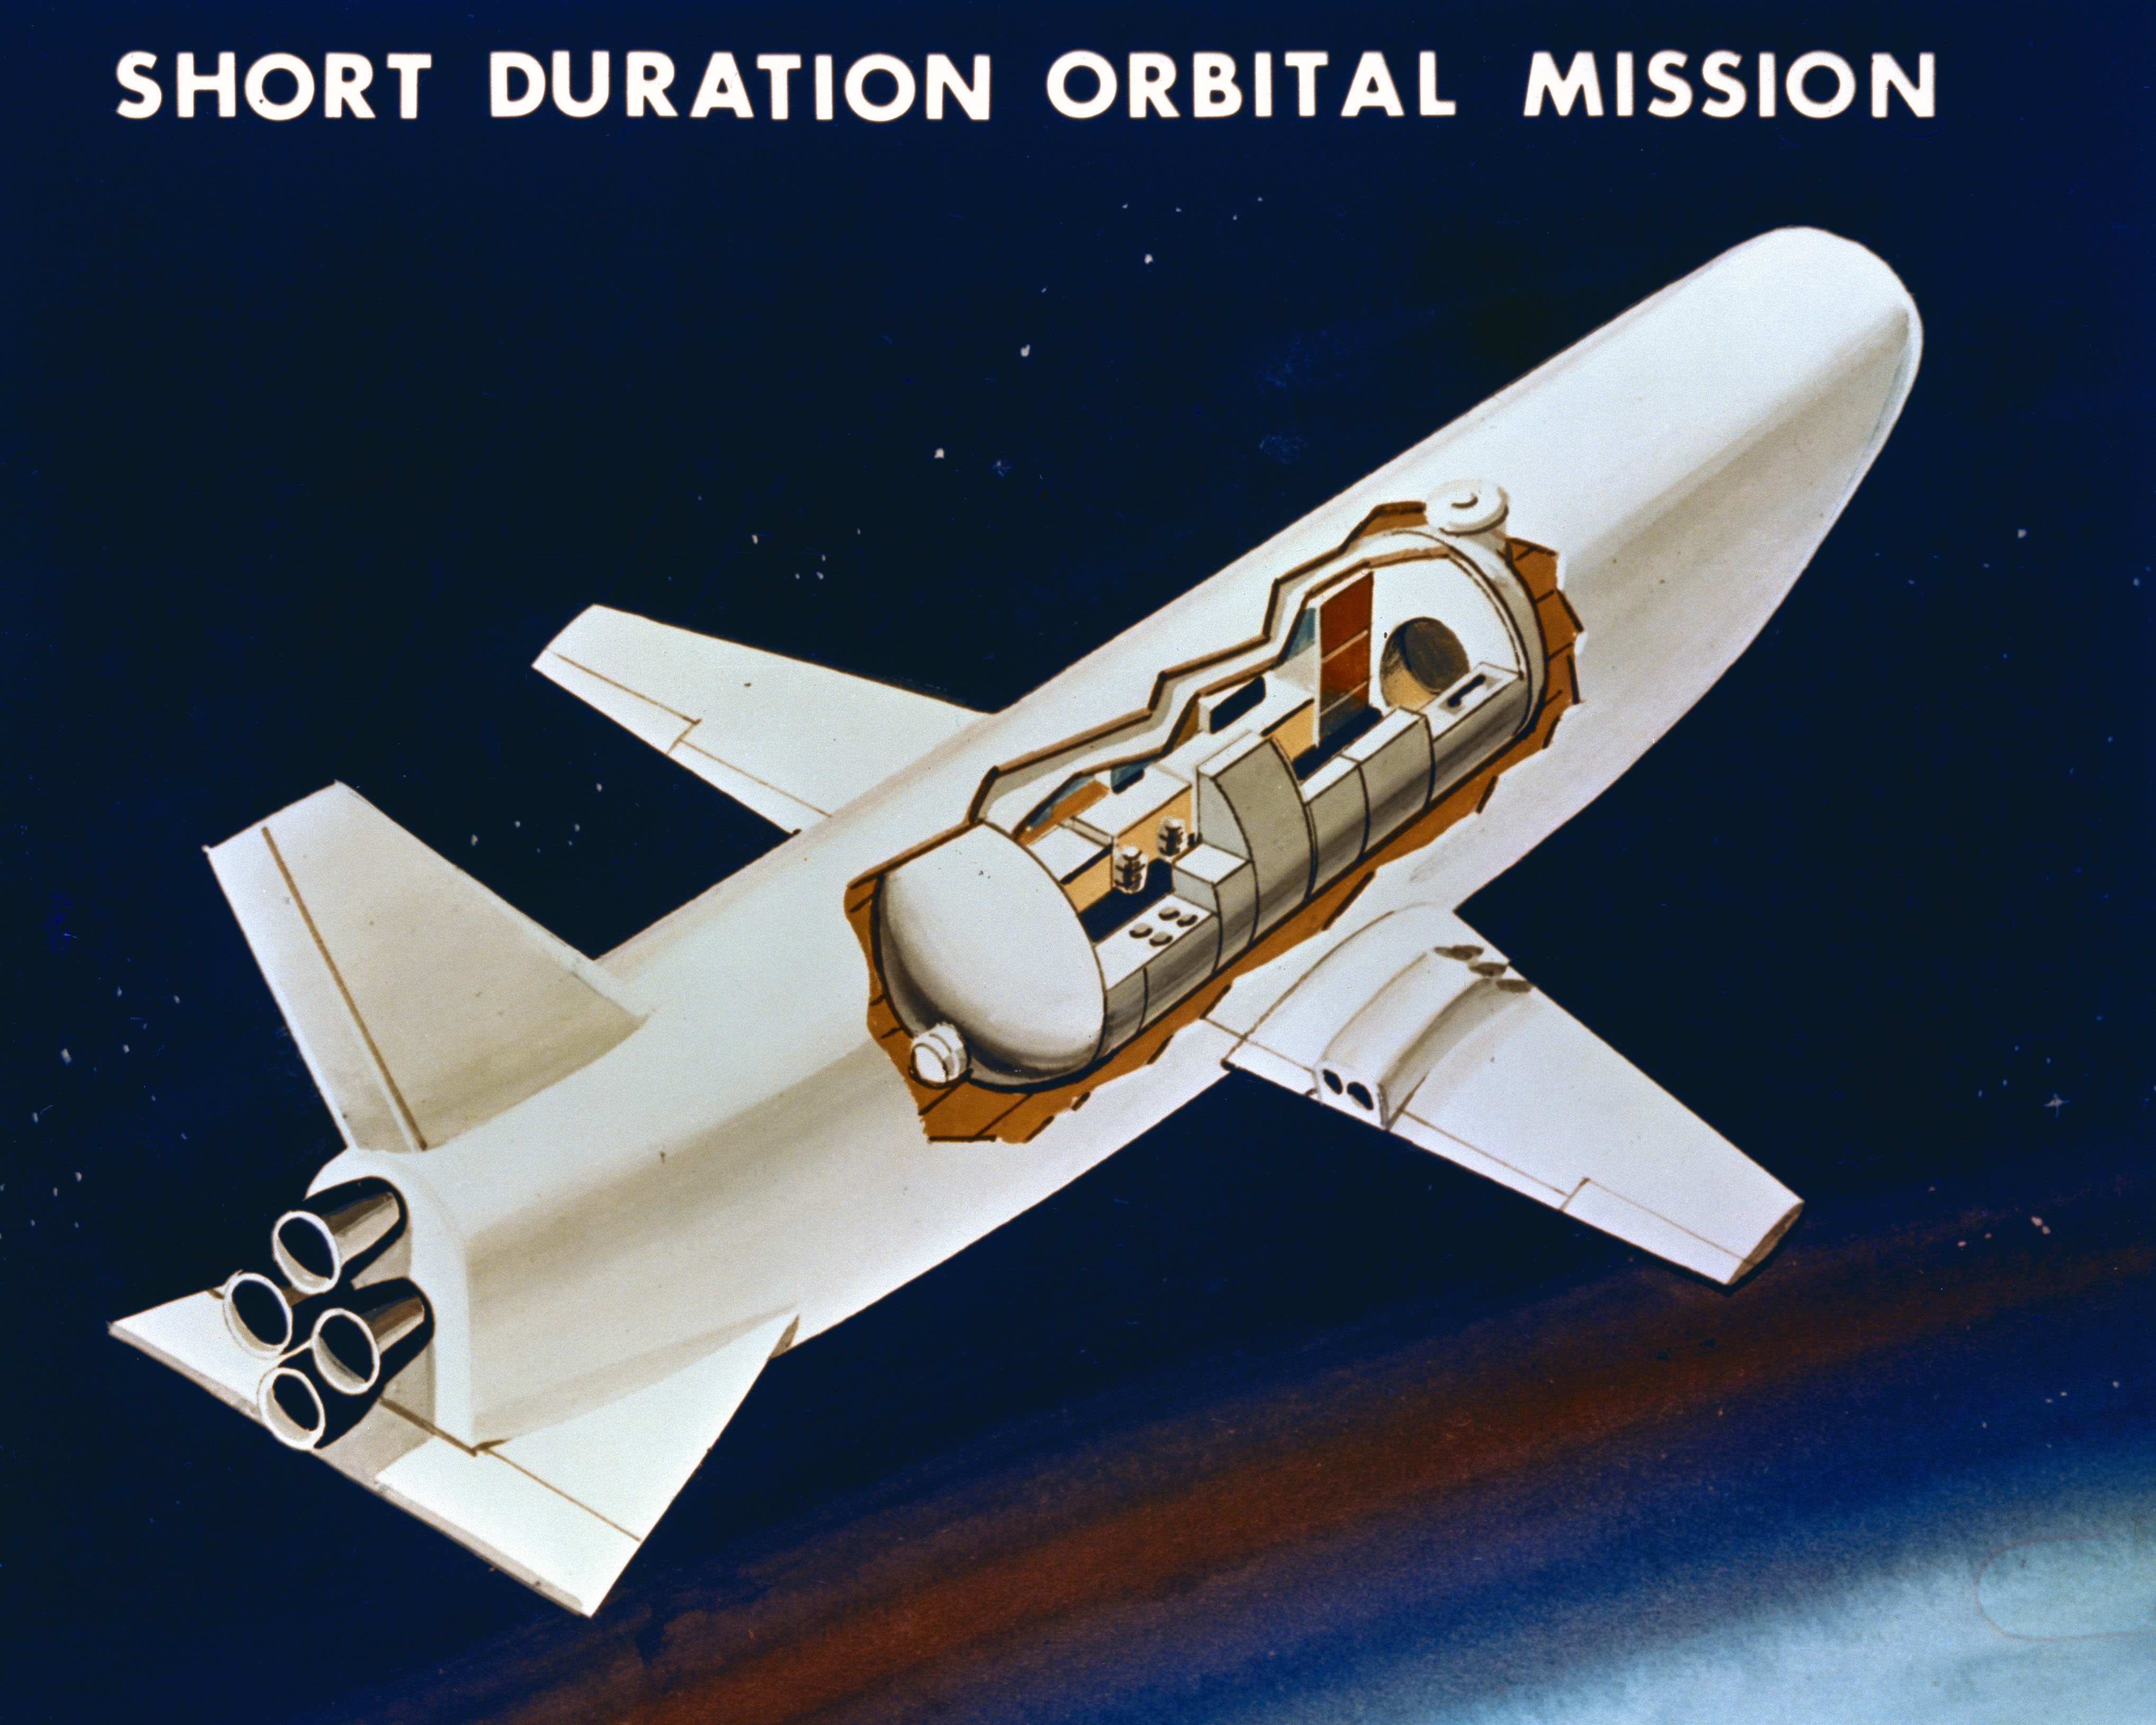 Illustration of a possible space shuttle orbiter from 1969